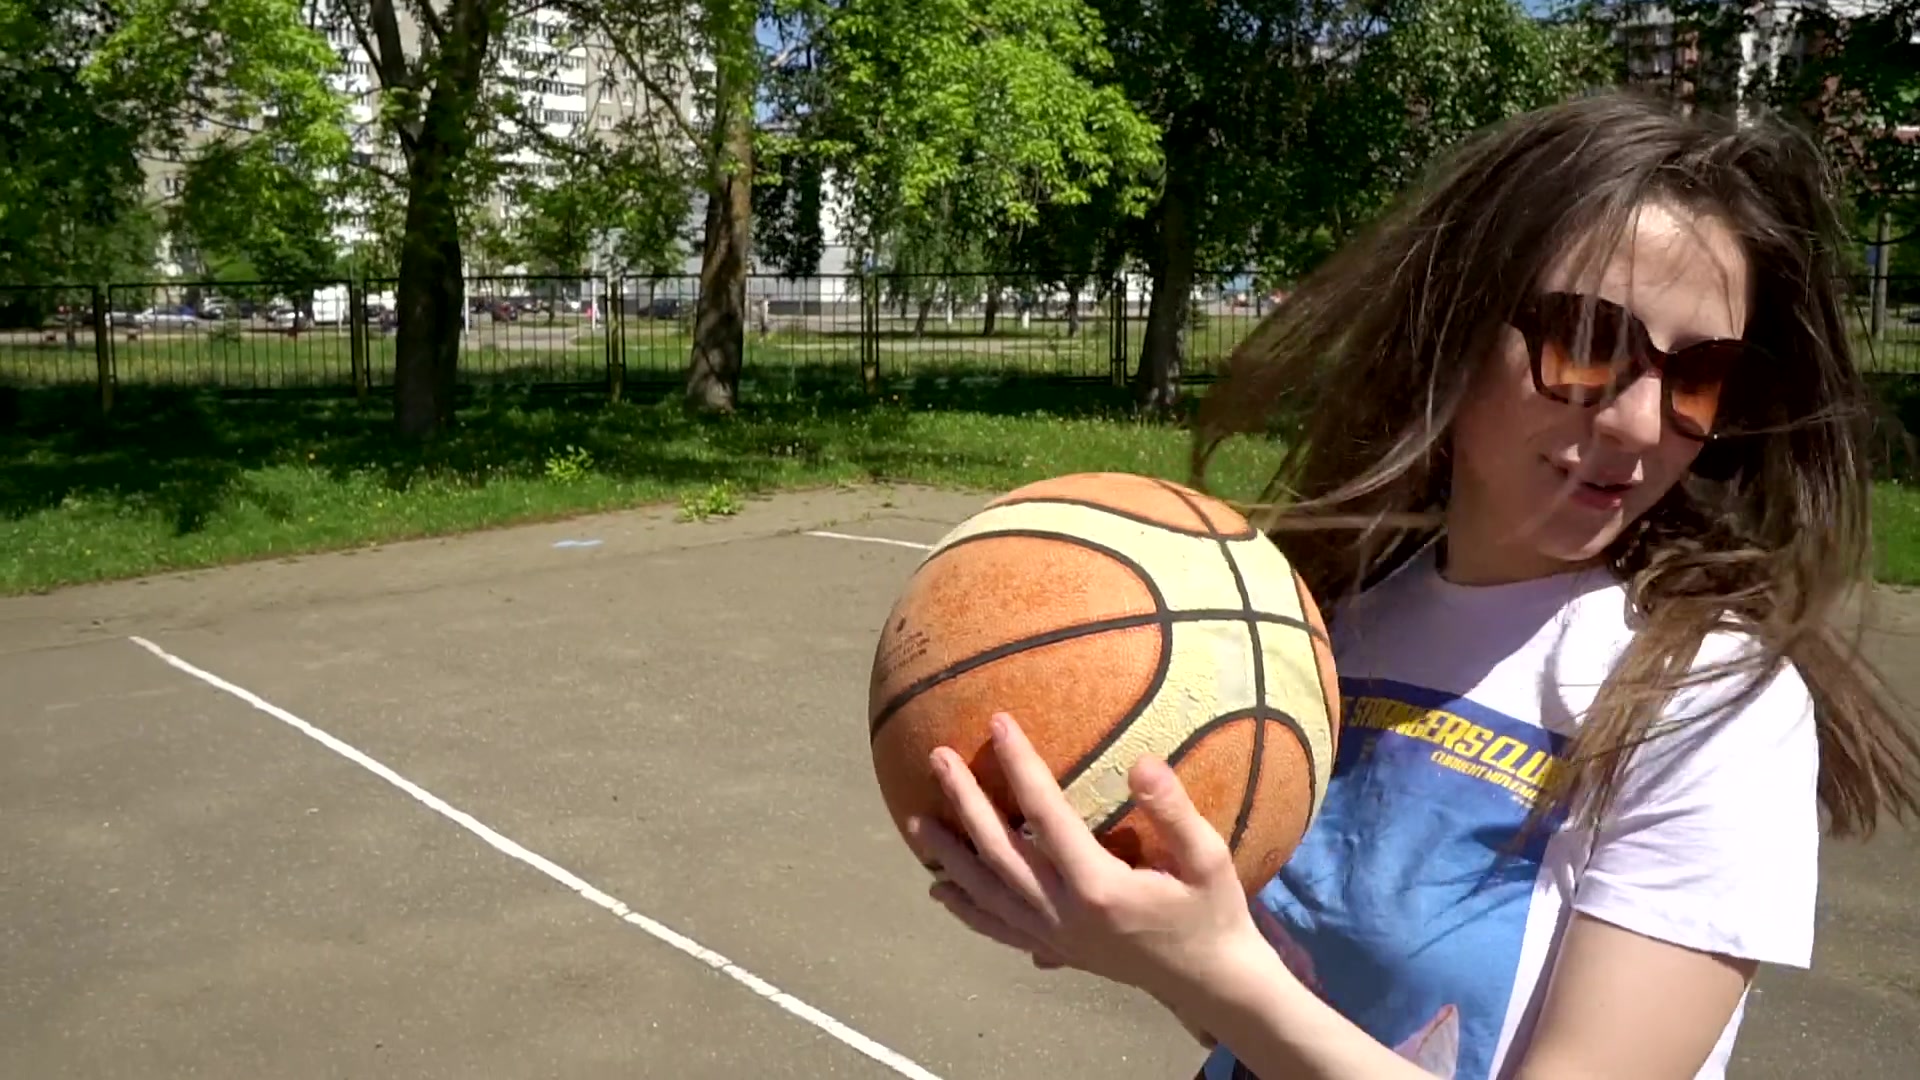 DickForLily - Spread The Basketball Player To Suck And